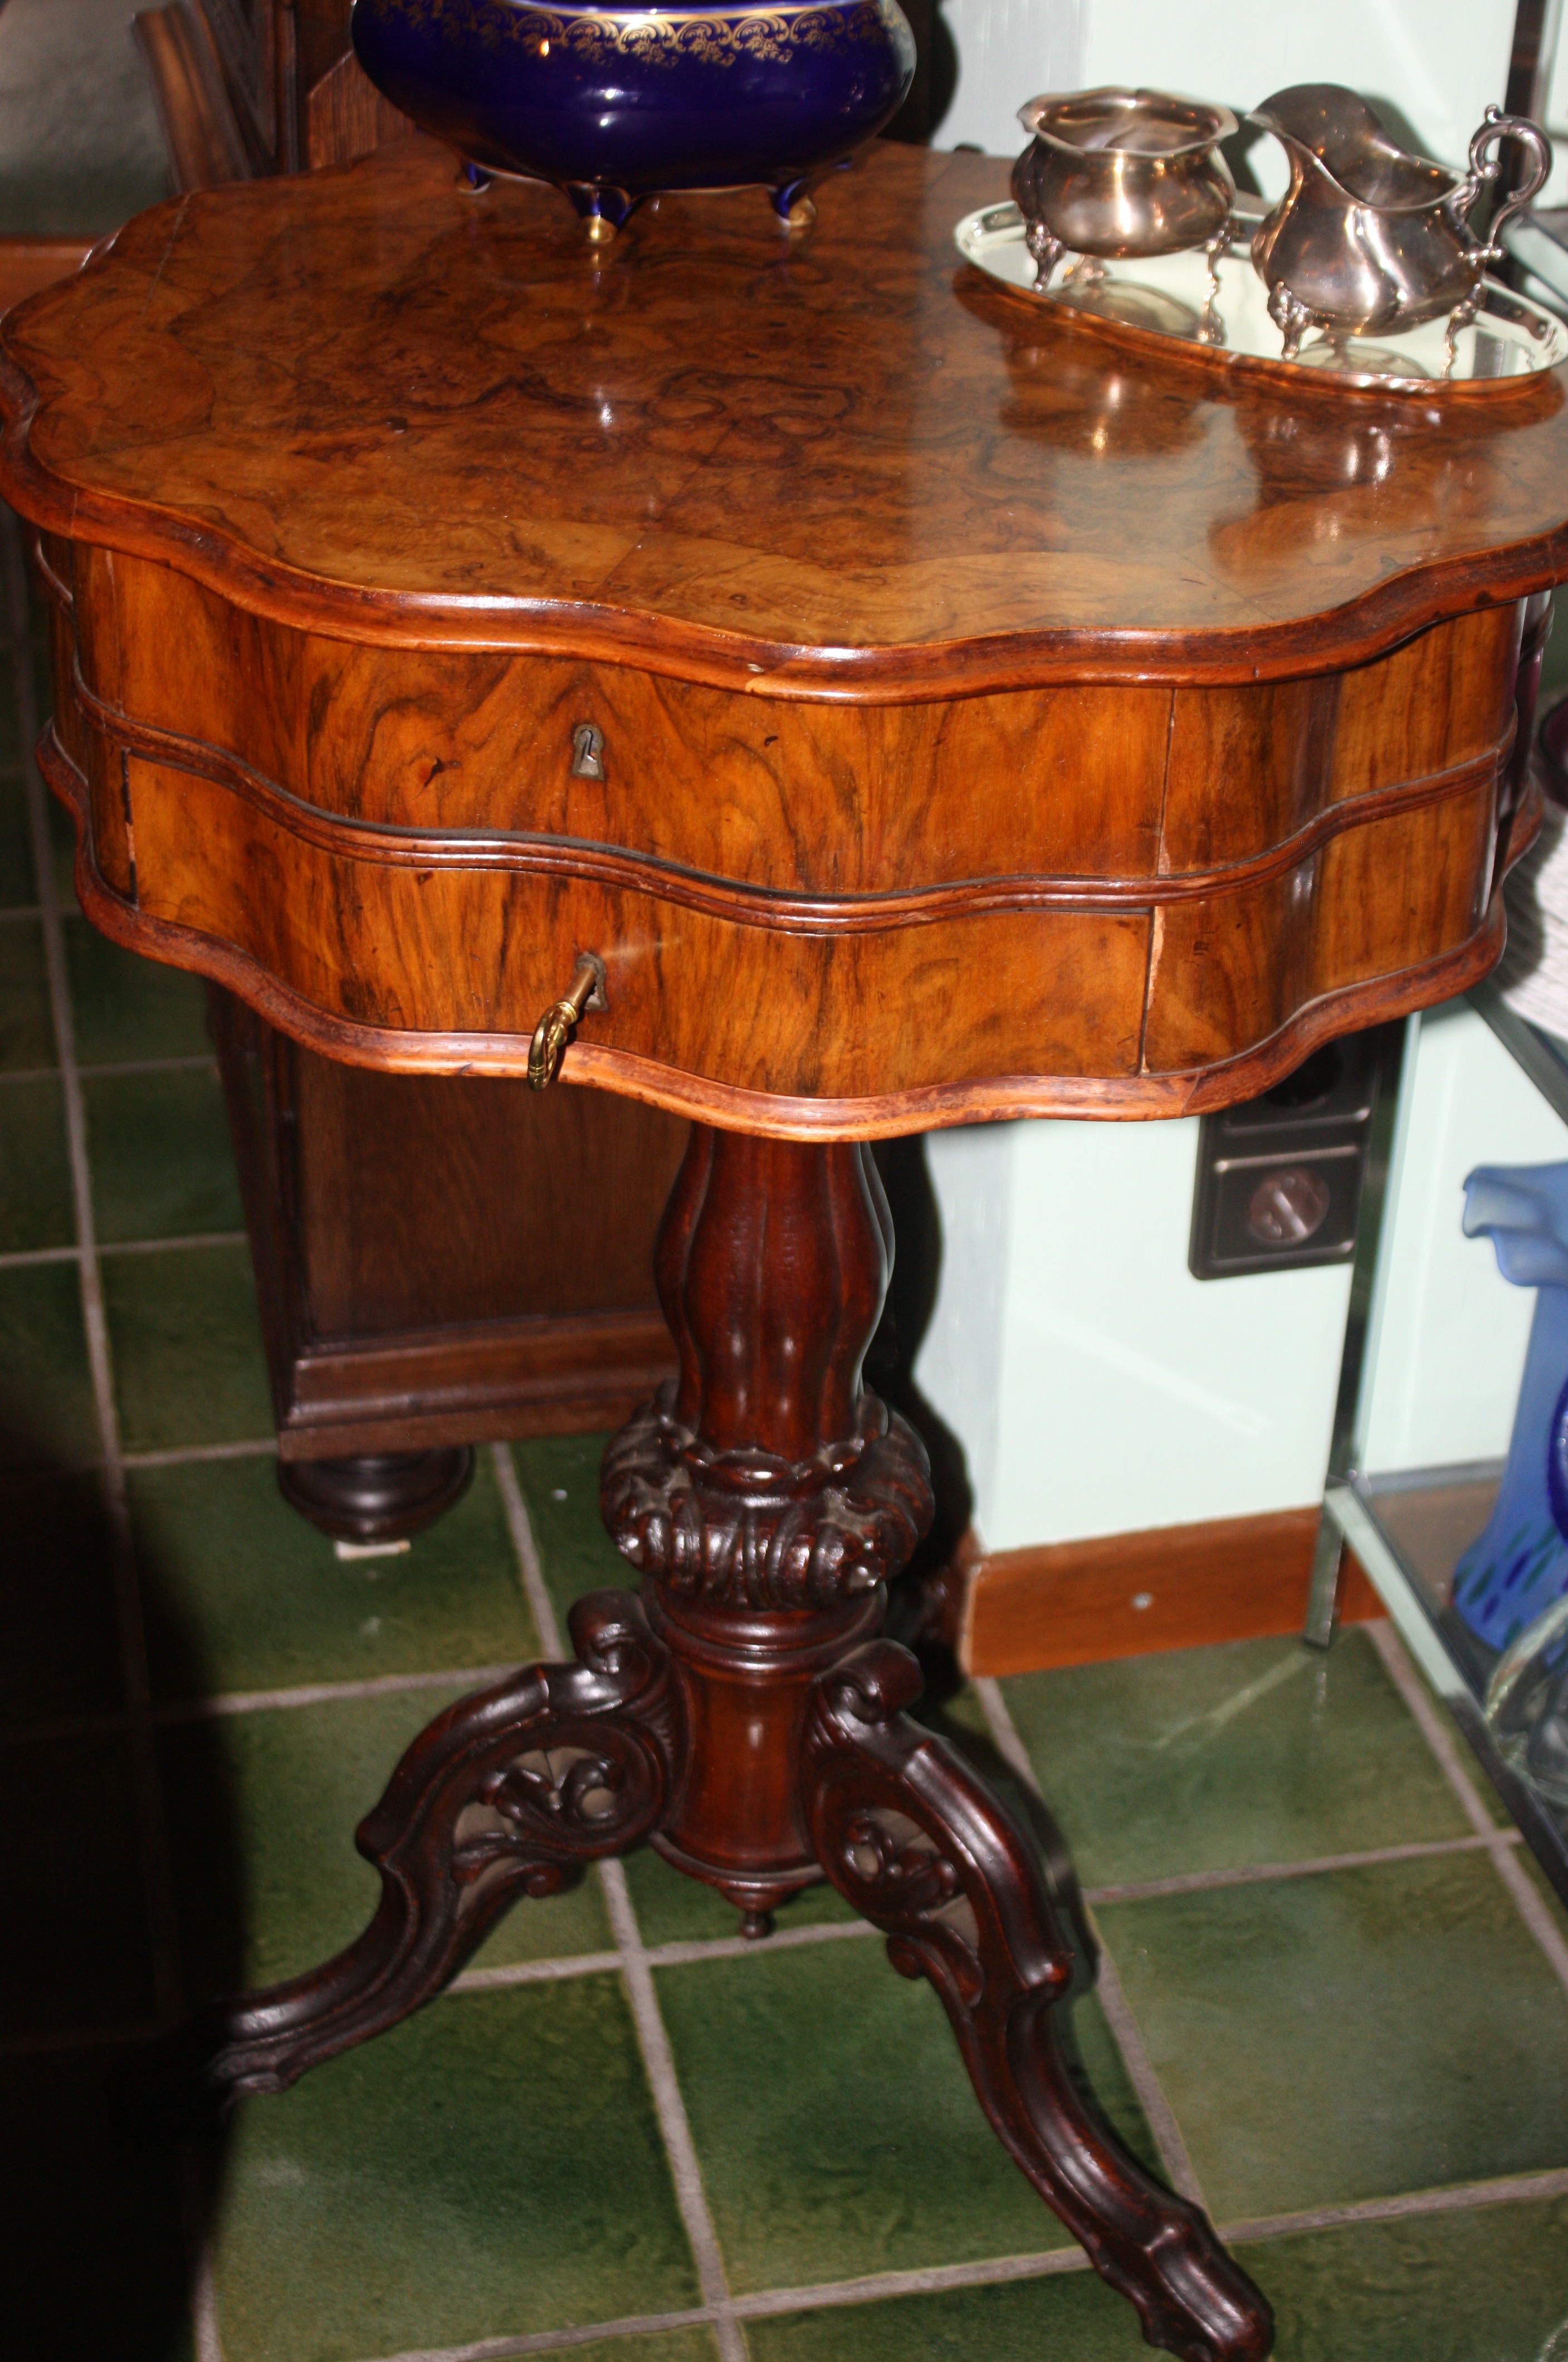 19th century Sewing Table